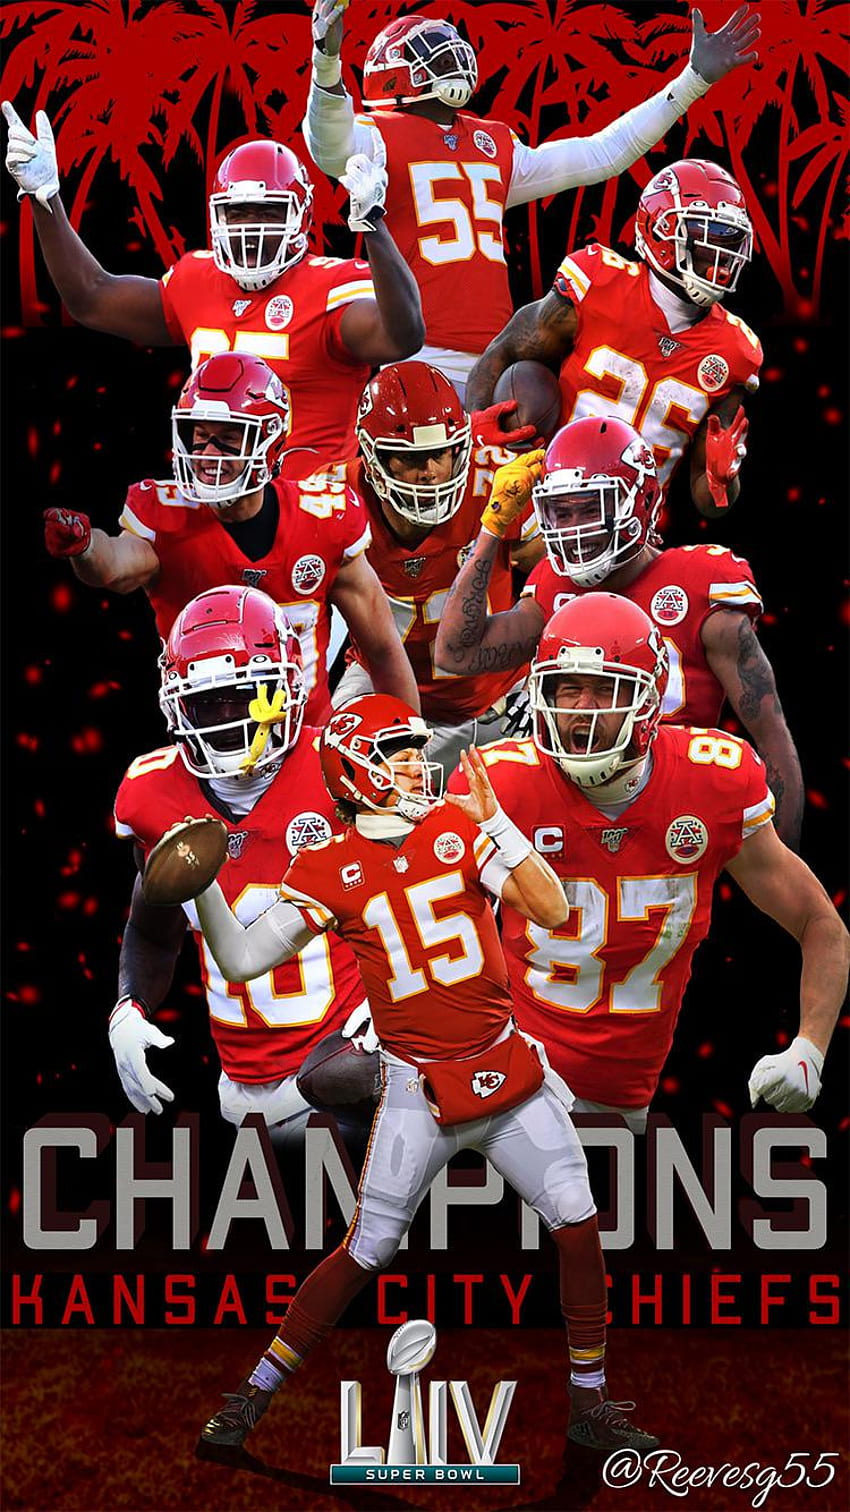 Kansas City Chiefs Wallpapers For Desktop and PC  Cool Kansas City Chiefs  Wallpapers for Mobile iPhone  Android  FancyOdds